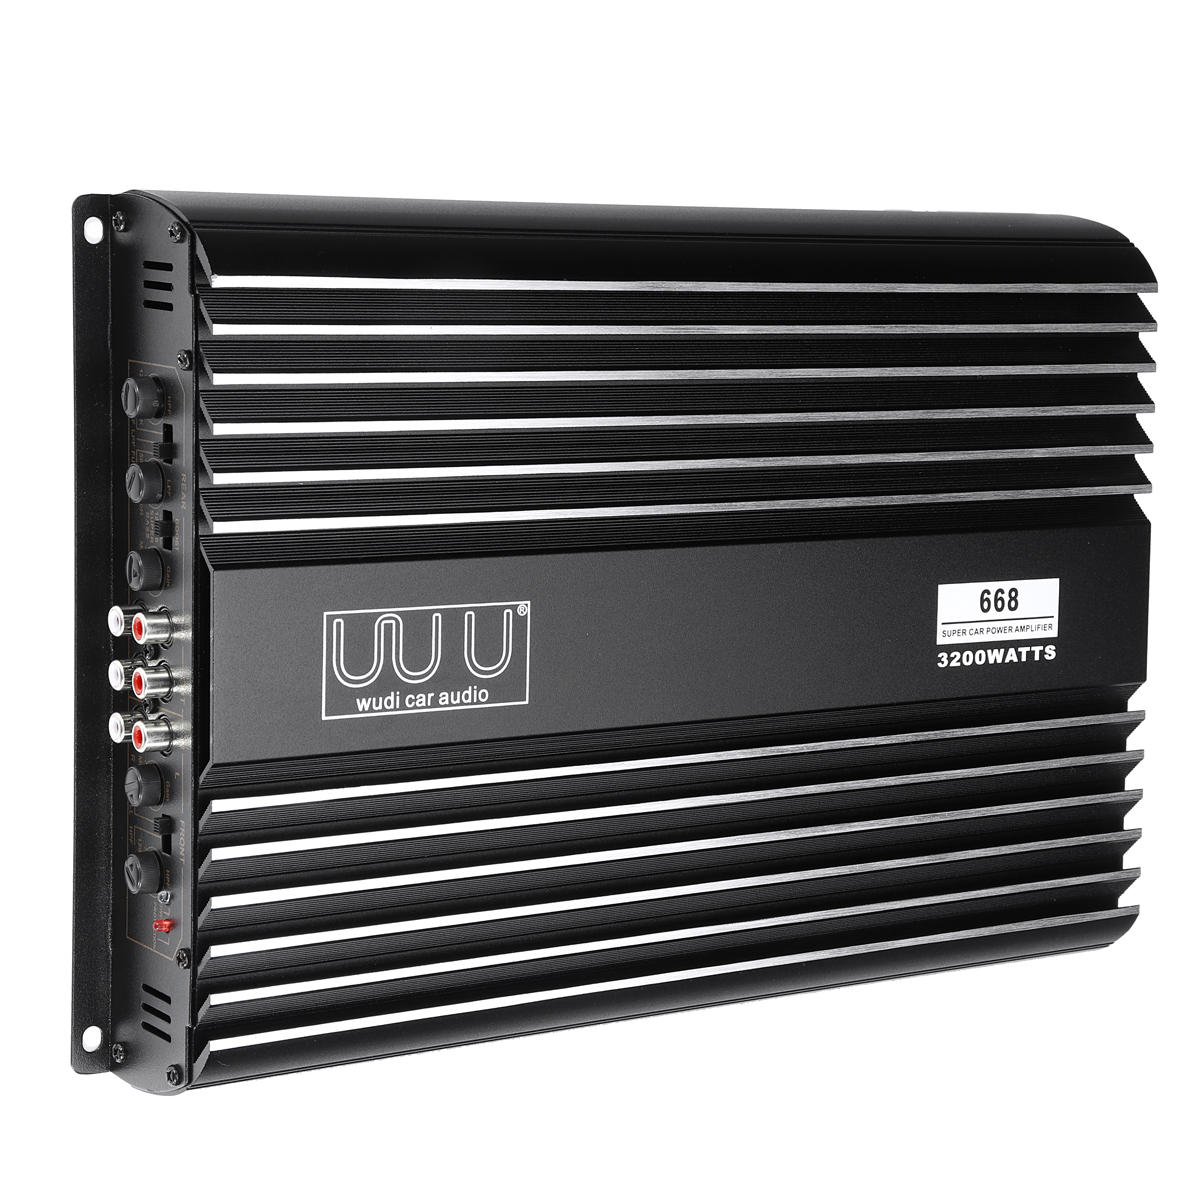 3200W 12V 4-Channel Car Audio Stereo Power Amplifier Bass ...